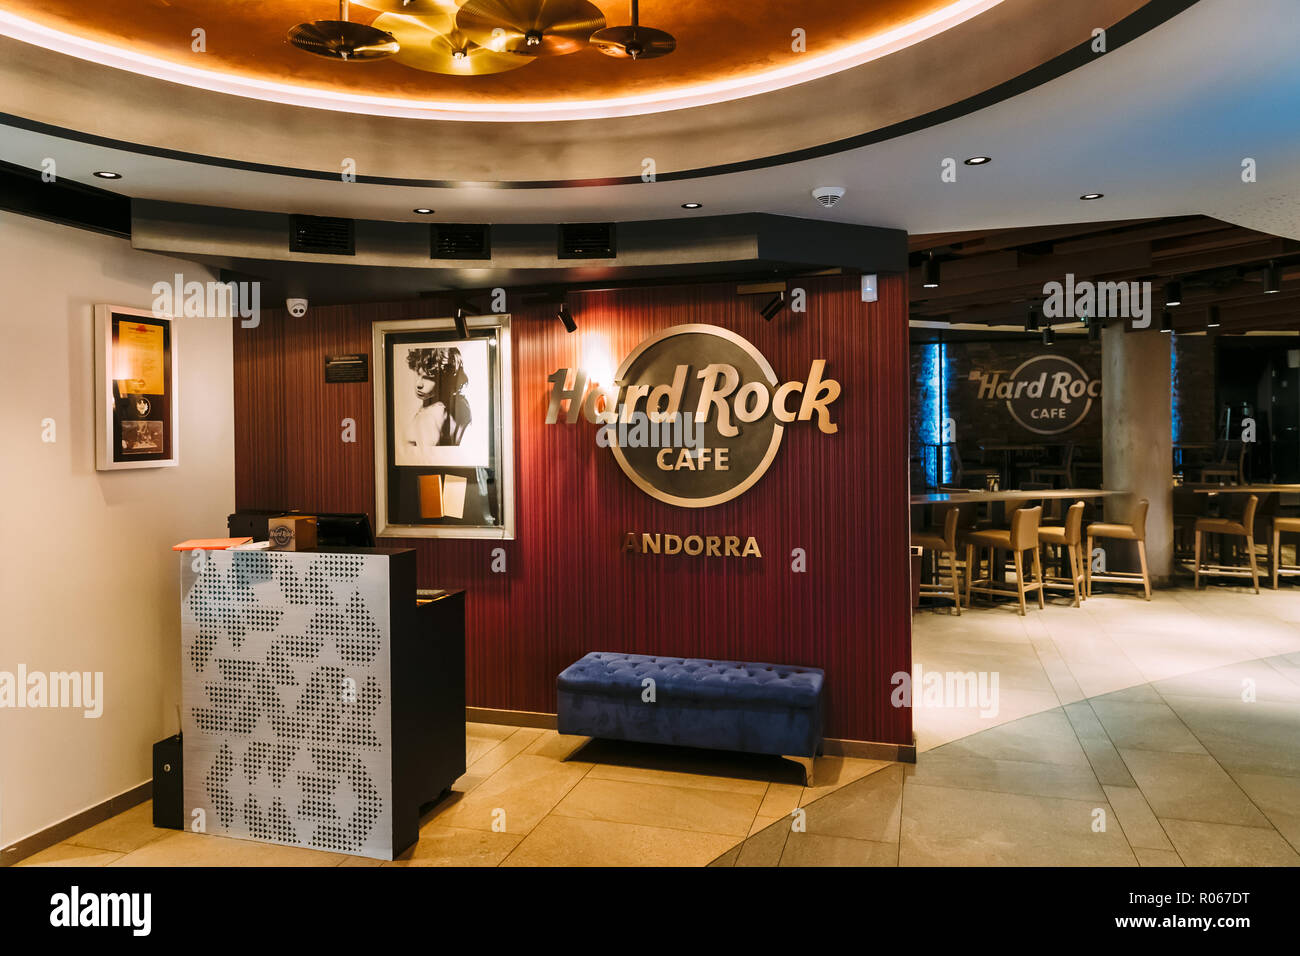 Andorra, Andorra - May 15, 2018: Inside Of Hard Rock Cafe. Hard Rock Cafe Inc. Is A Chain Of Theme Restaurants Founded In 1971 By Isaac Tigrett And Pe Stock Photo